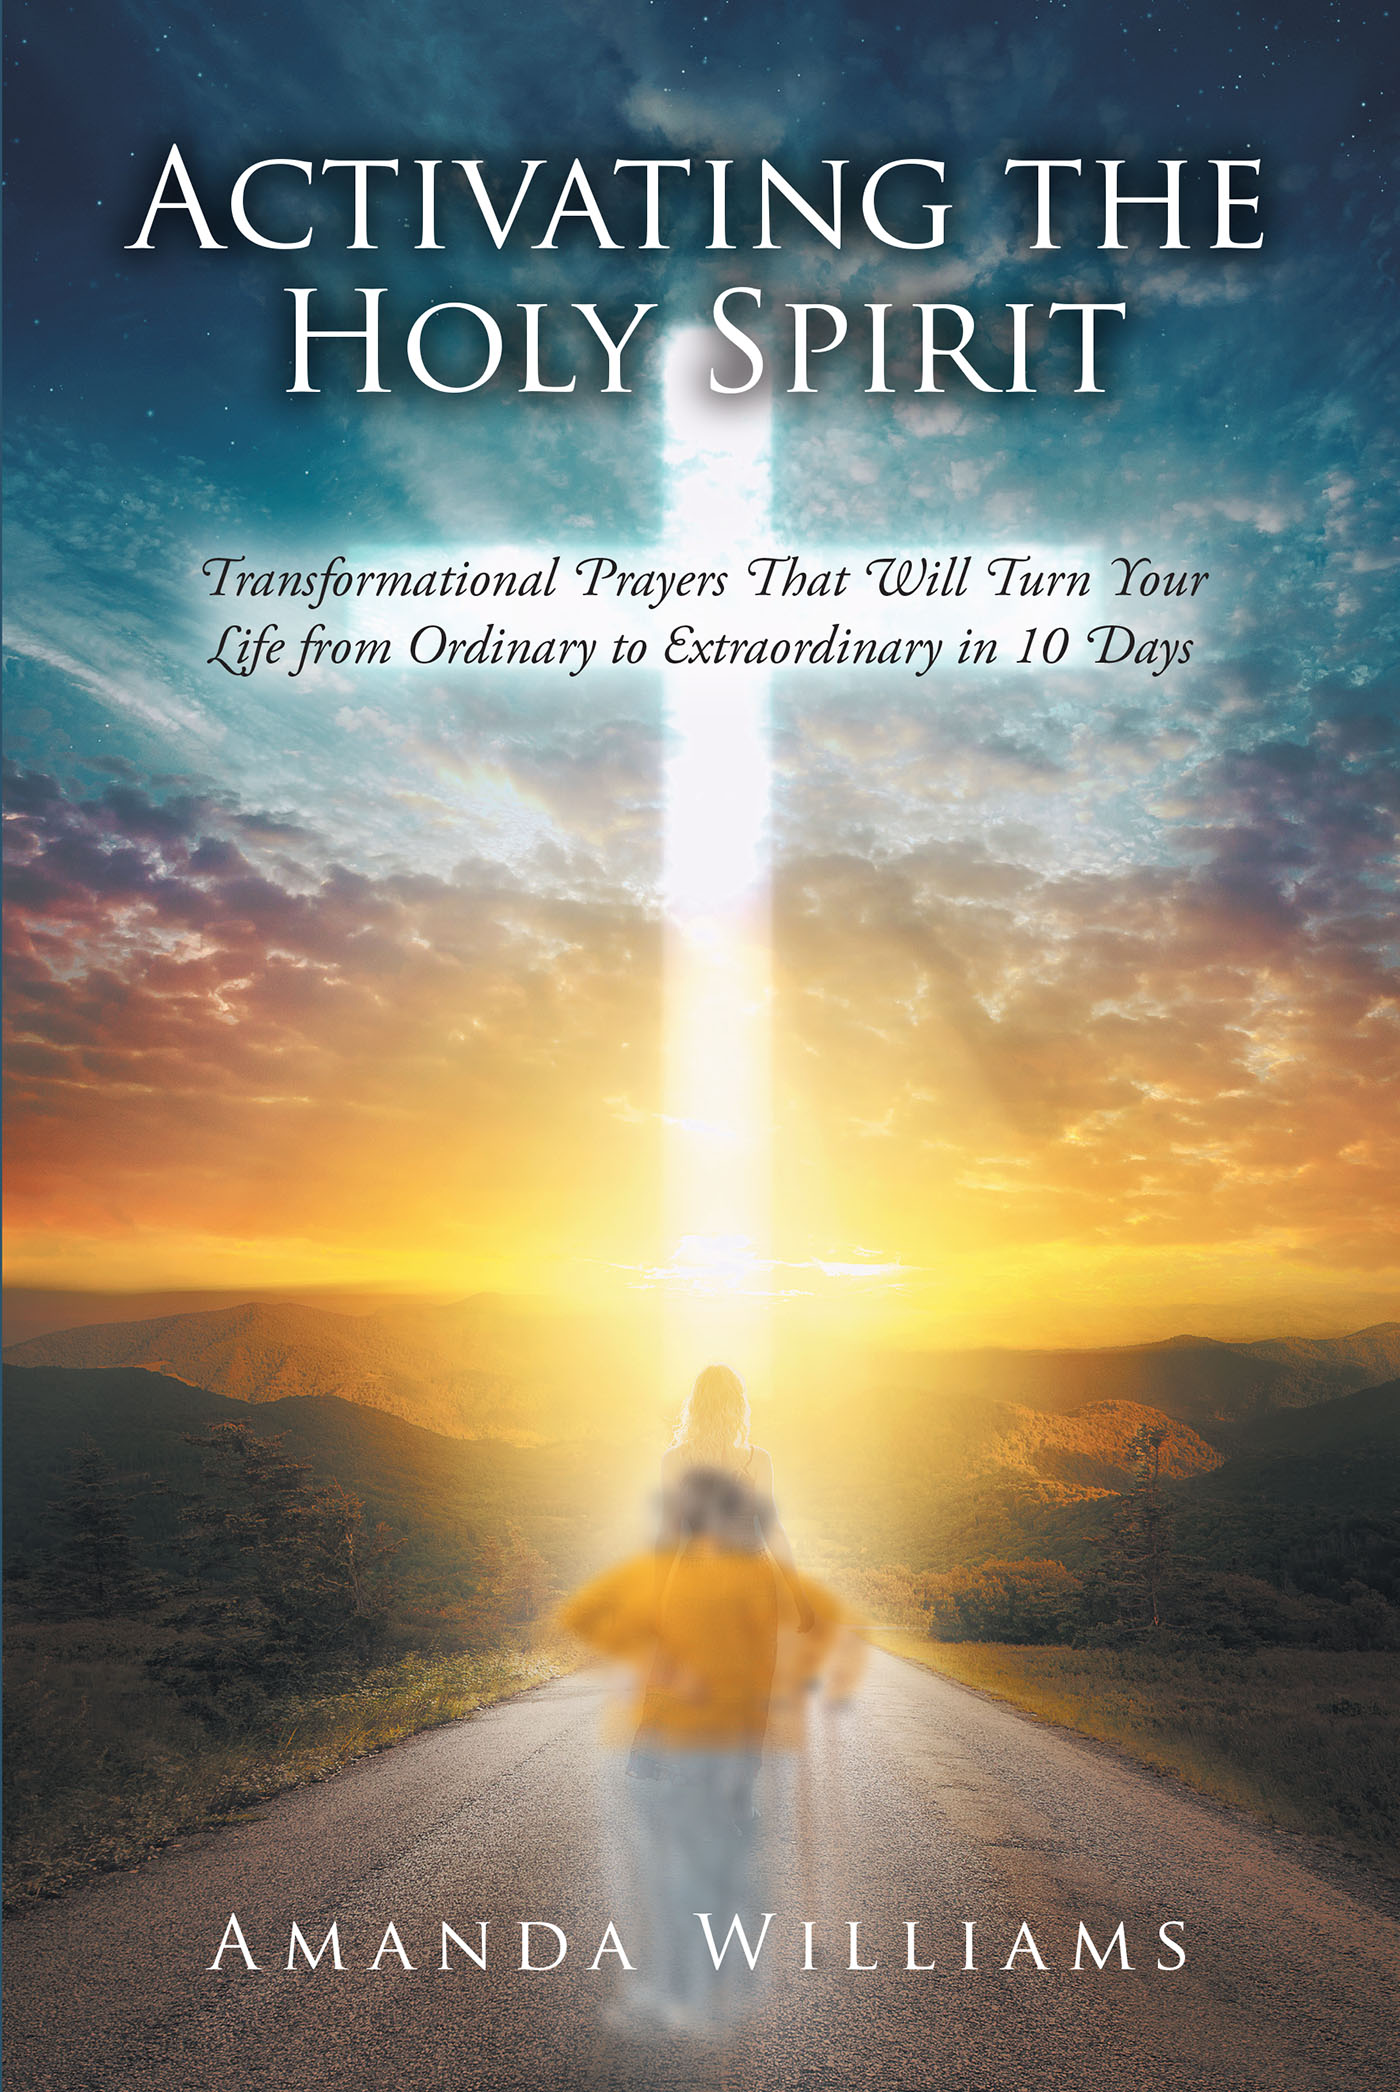 Amanda Williams’s Newly Released "Activating the Holy Spirit" is an Interactive Opportunity to Develop One’s Prayer Skills